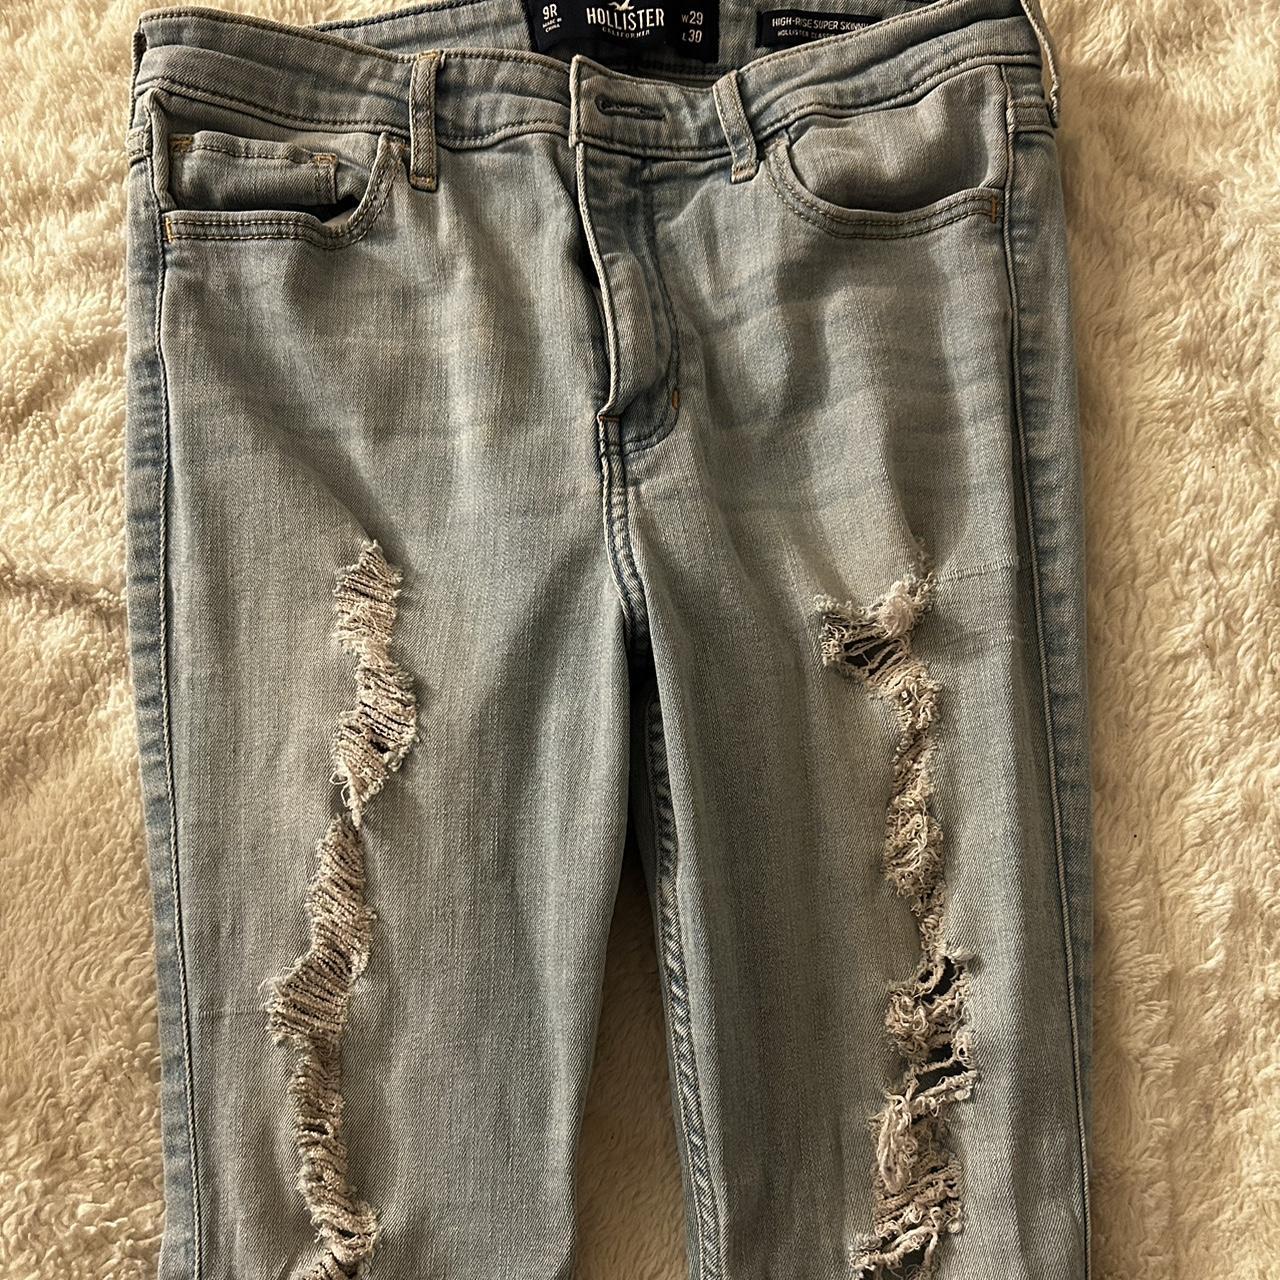 Hollister Light Blue Ripped Jeans